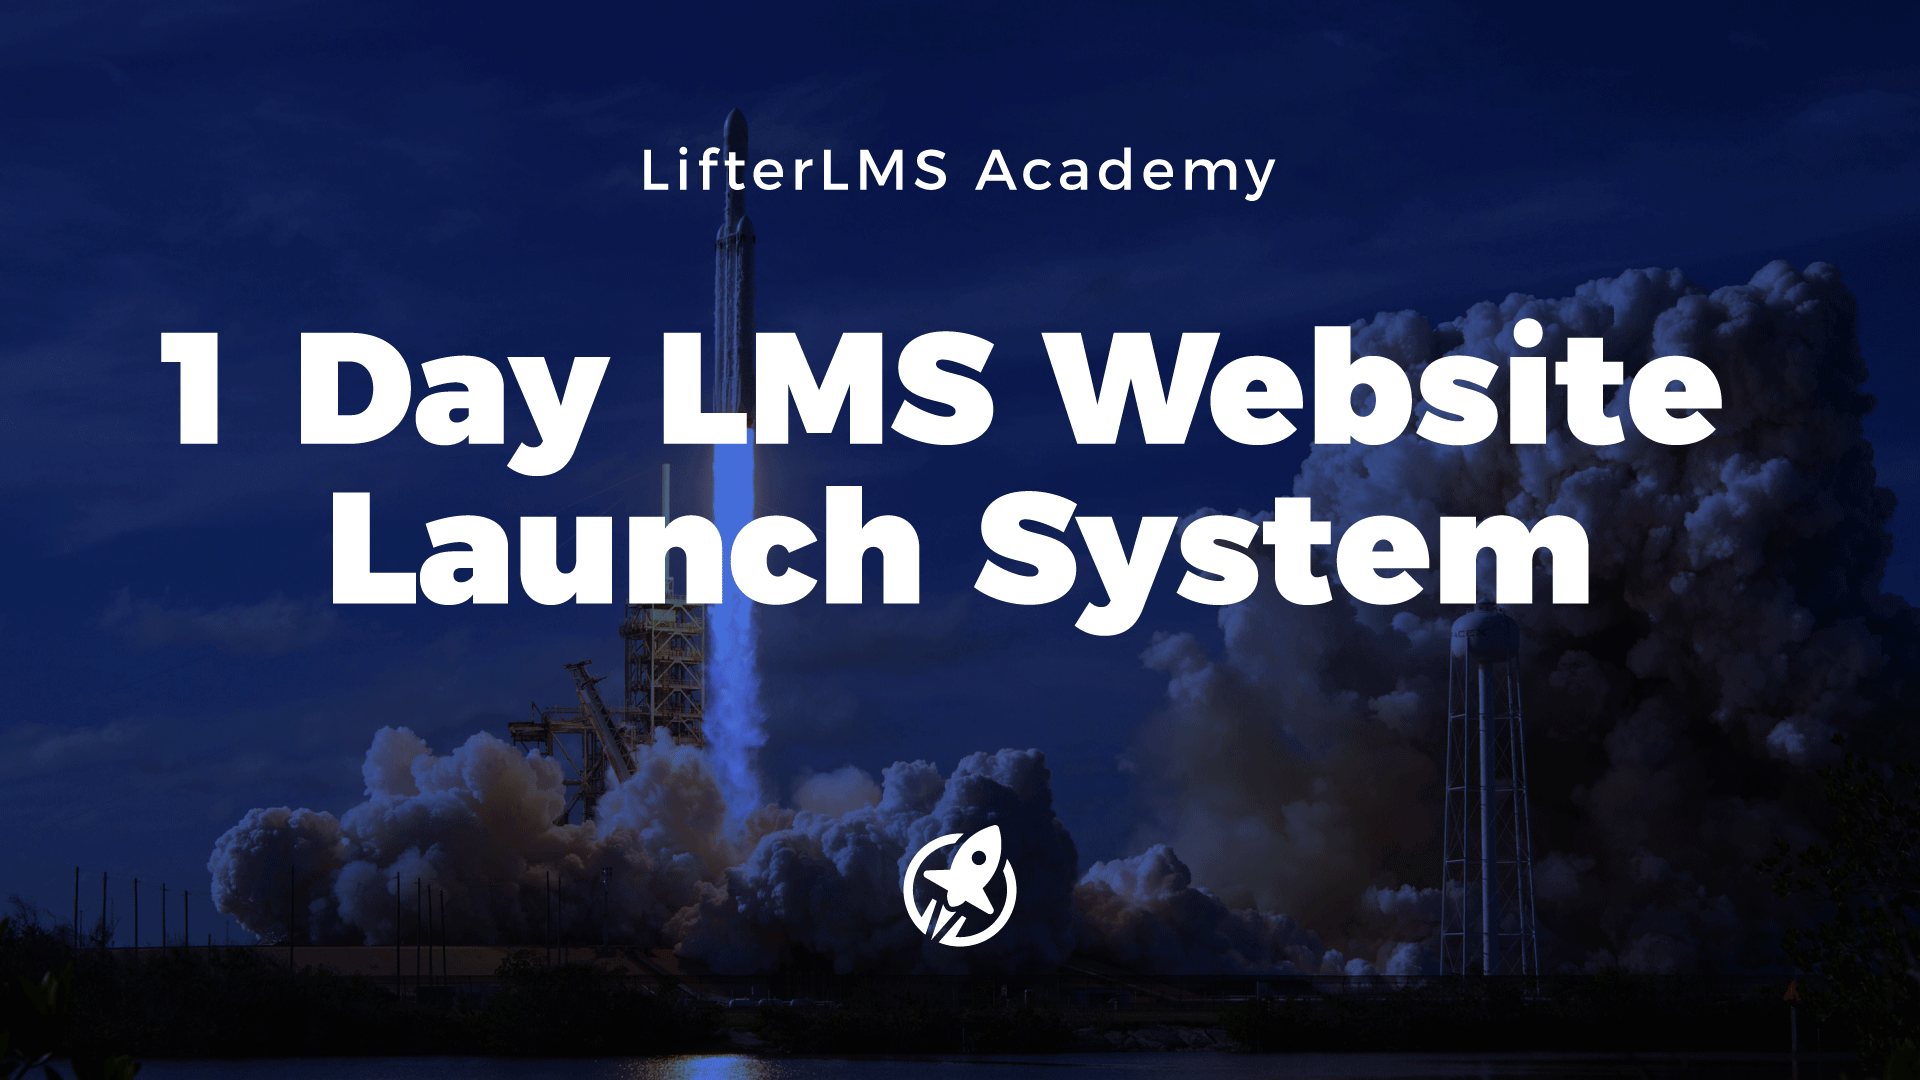 1 Day LMS Website Launch System